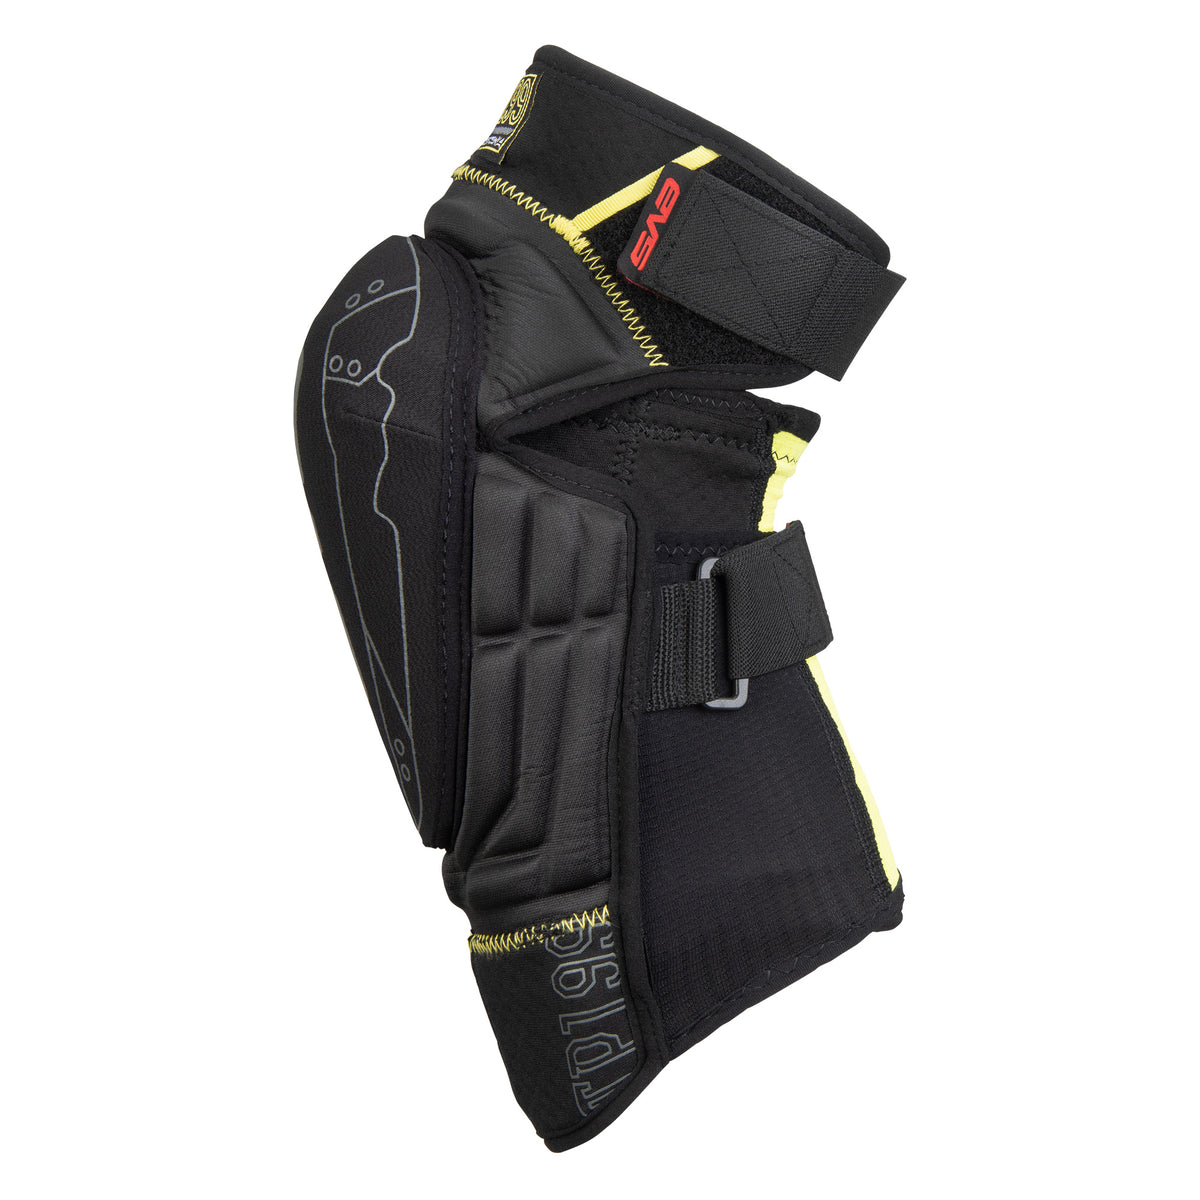 TP 199 Youth Knee Pad - EVS Sports